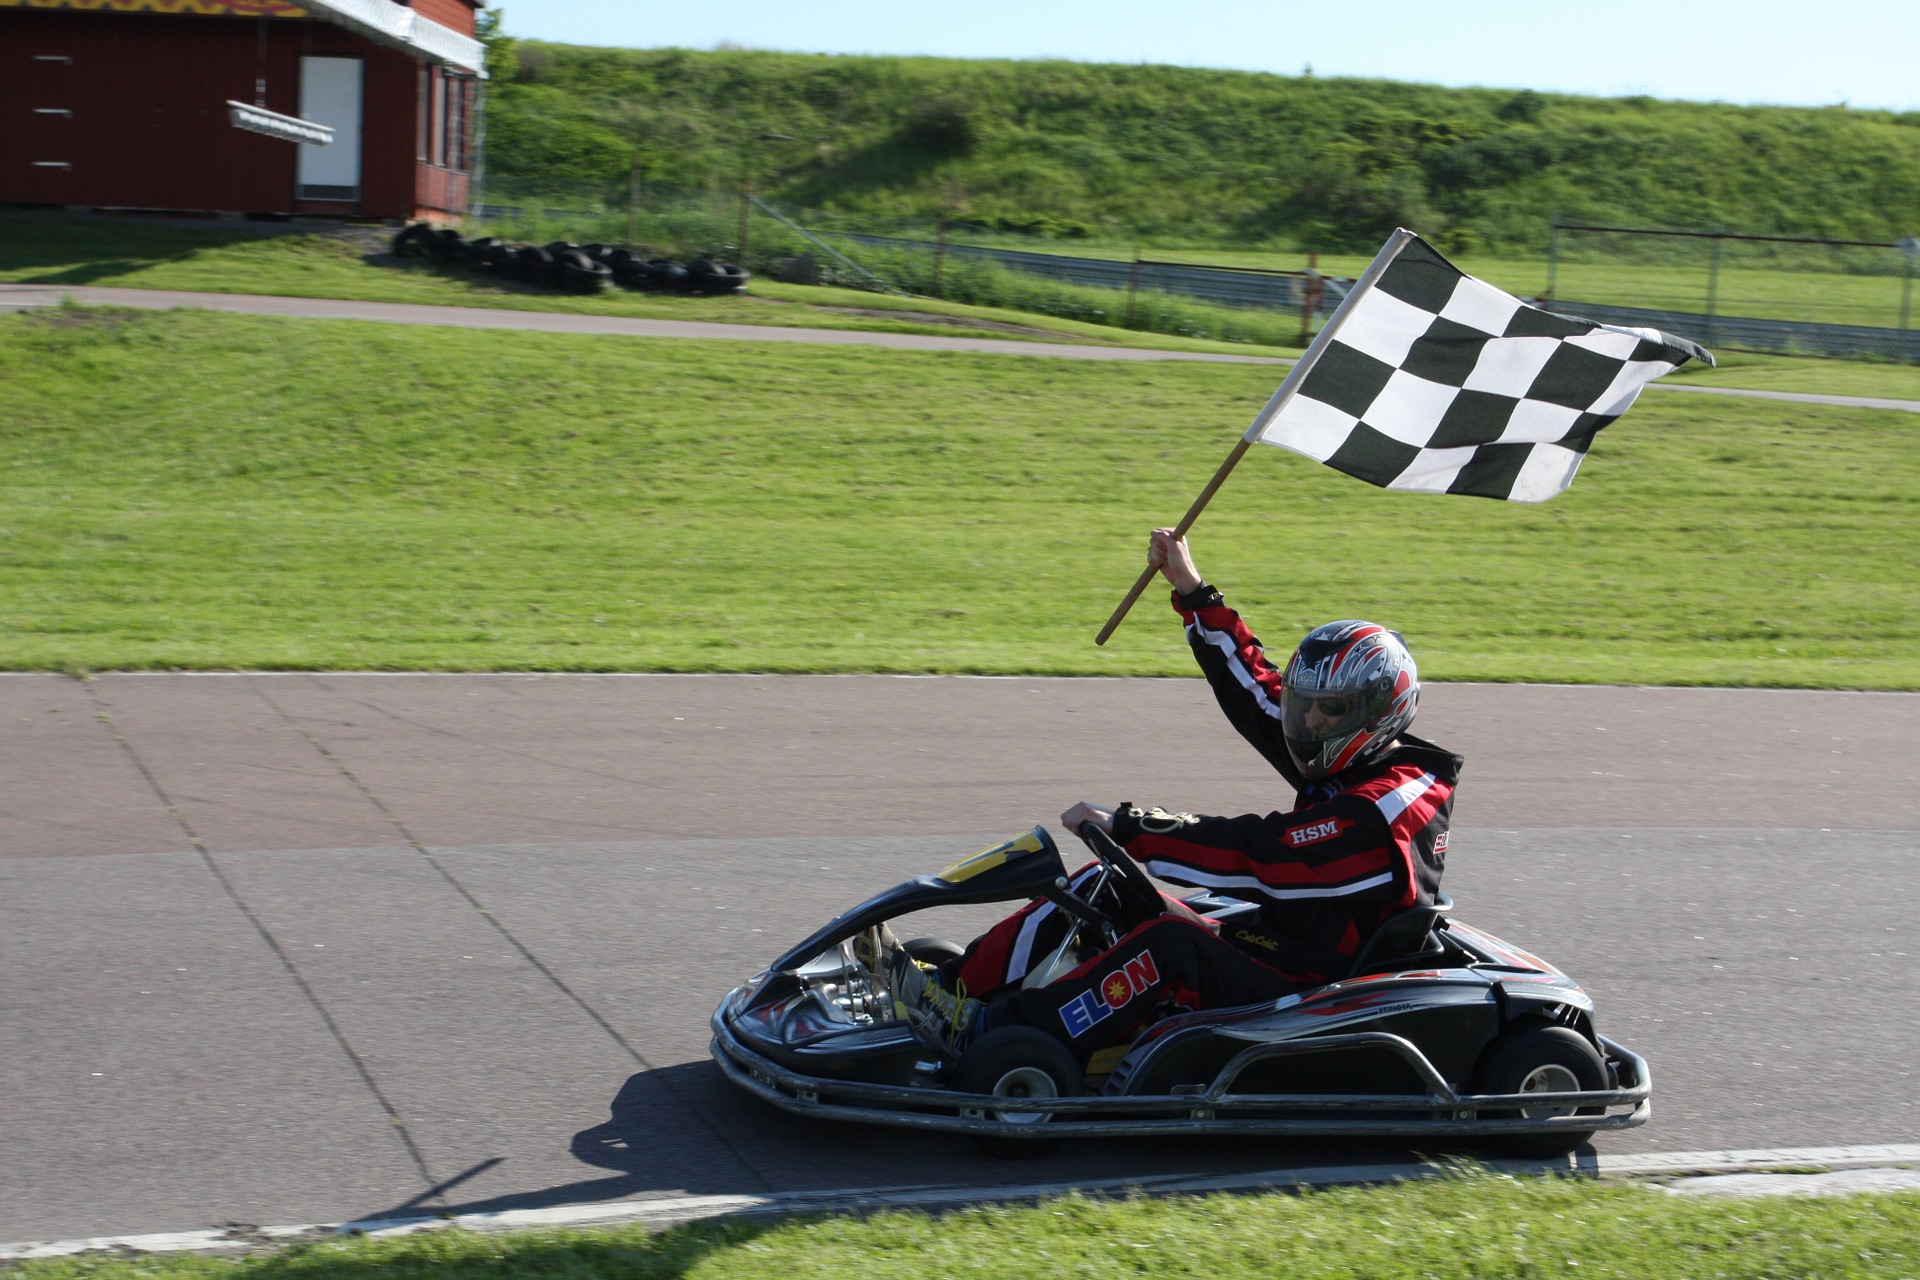 Man holding a race flag is driving the go kart vehicle